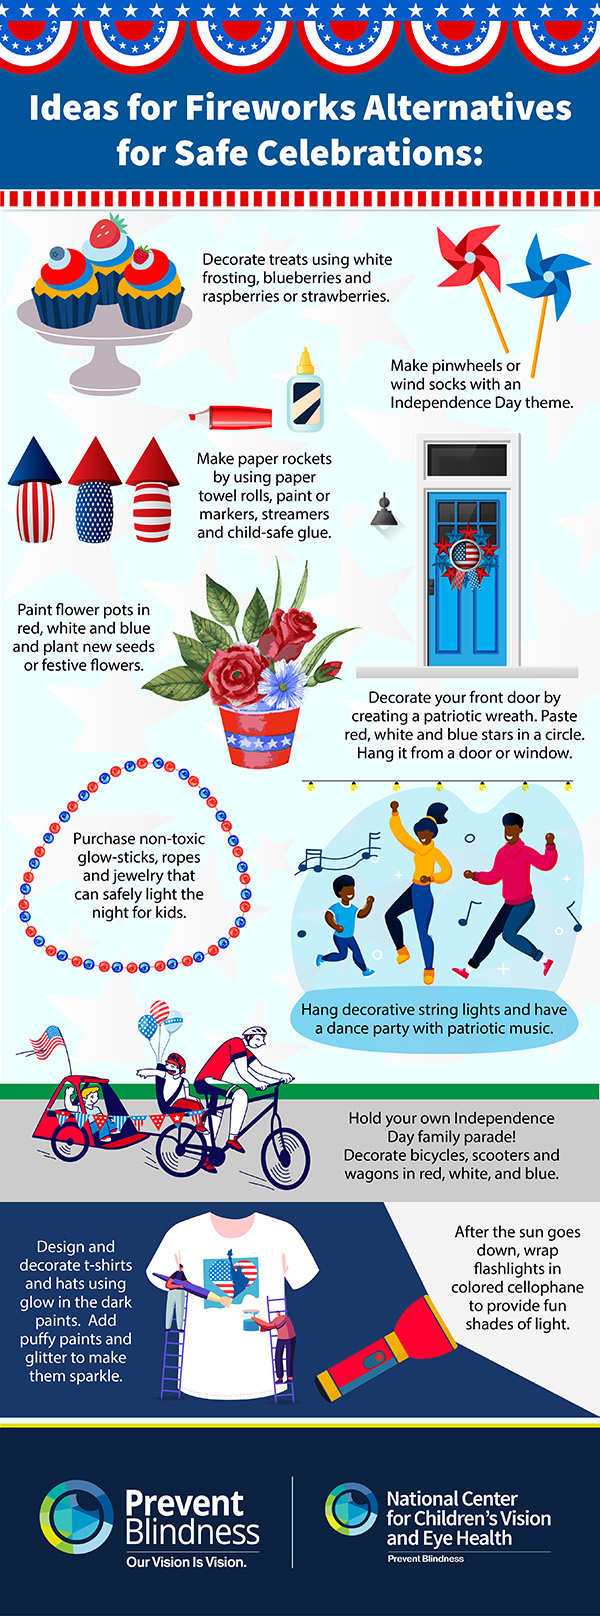 Tips for Celebrating the Fourth of July Safely